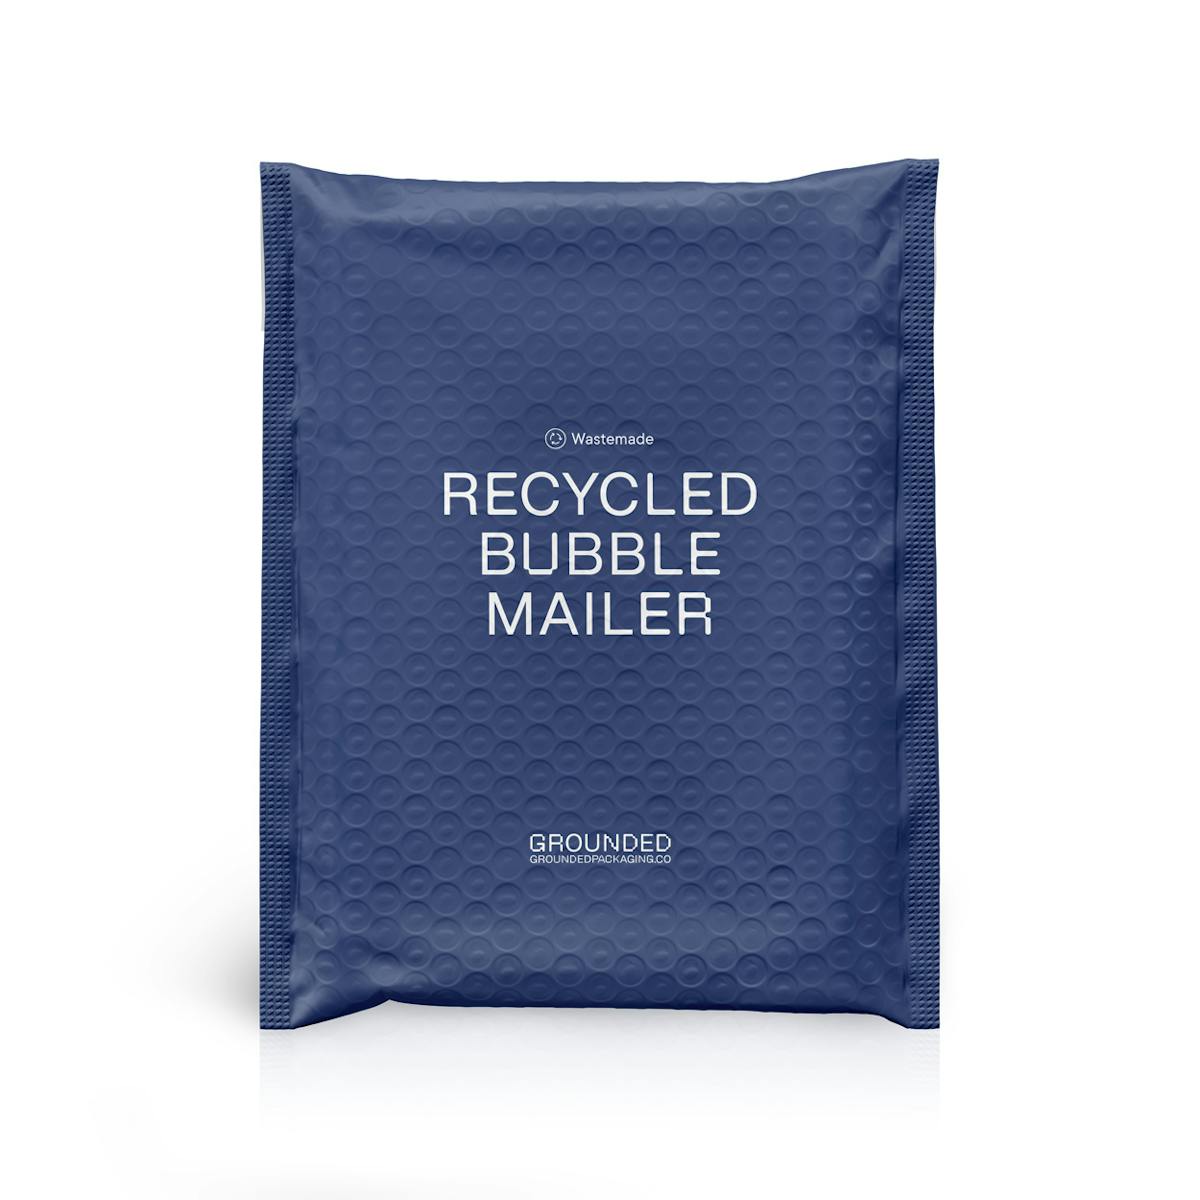 Recycled bubble mailer 1